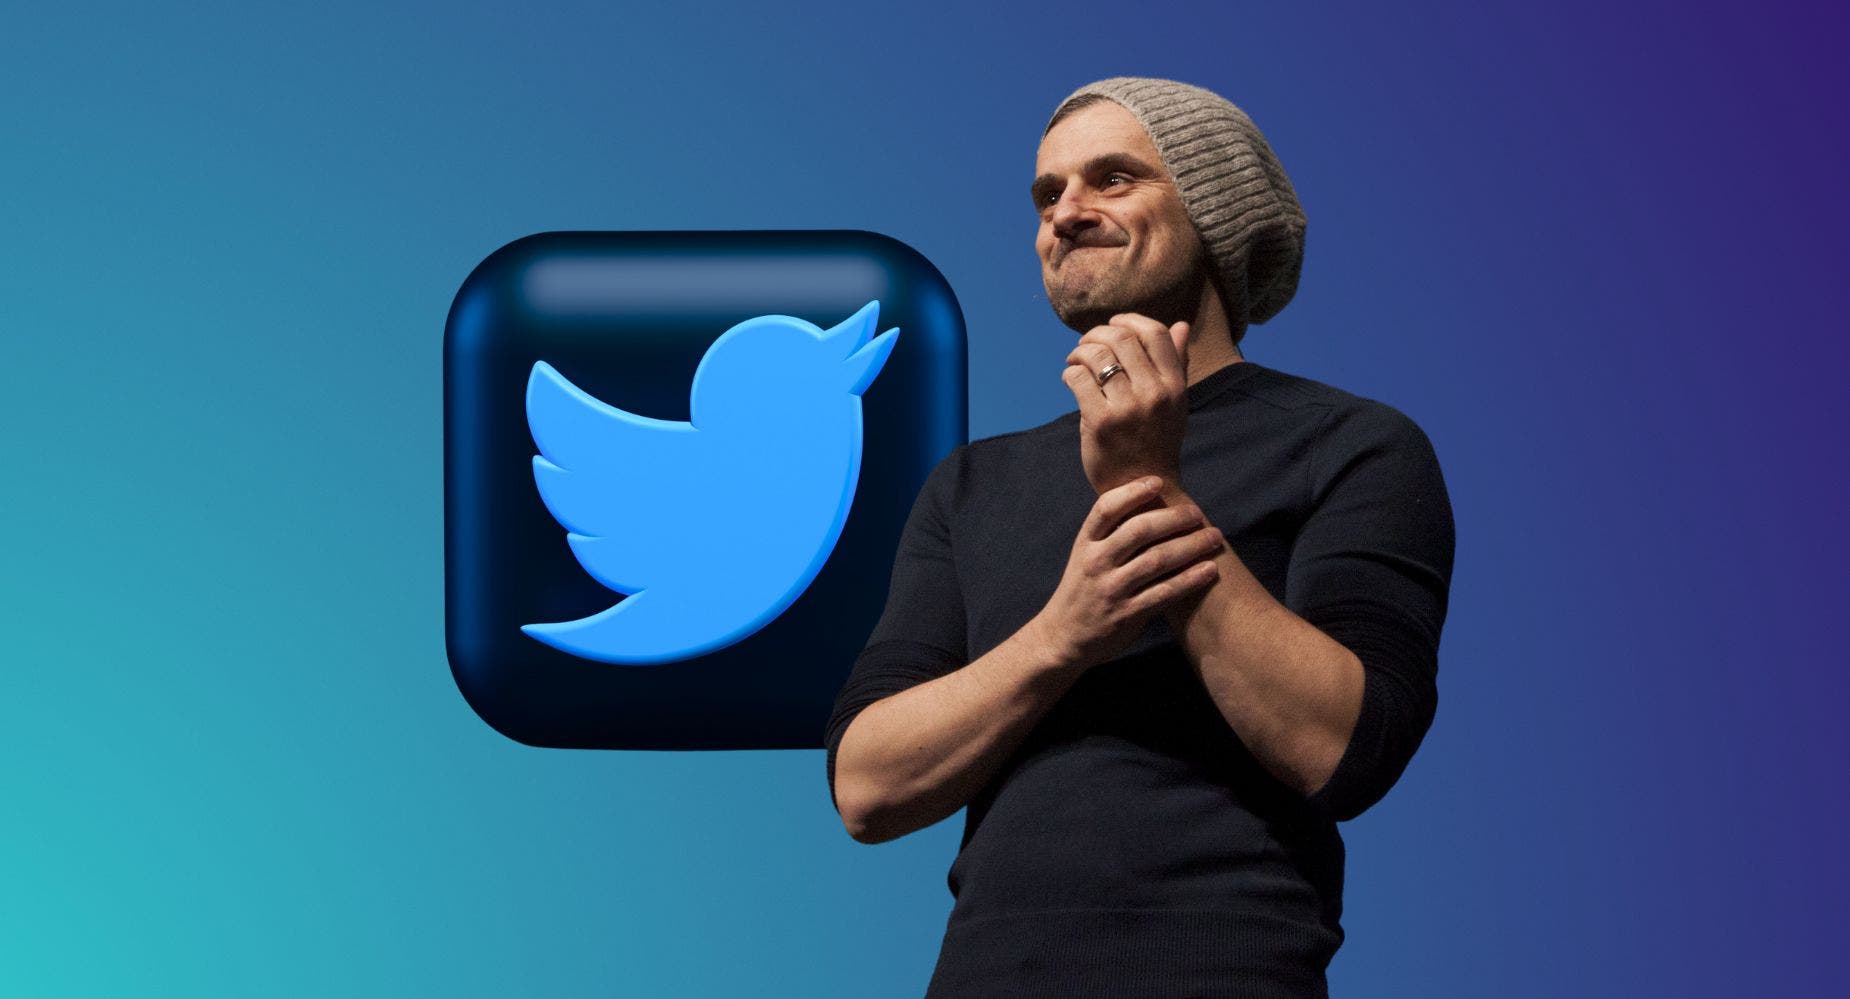 Gary Vee On Why Twitter Bringing Back Vine Is A Strong Play During Economic Downturn